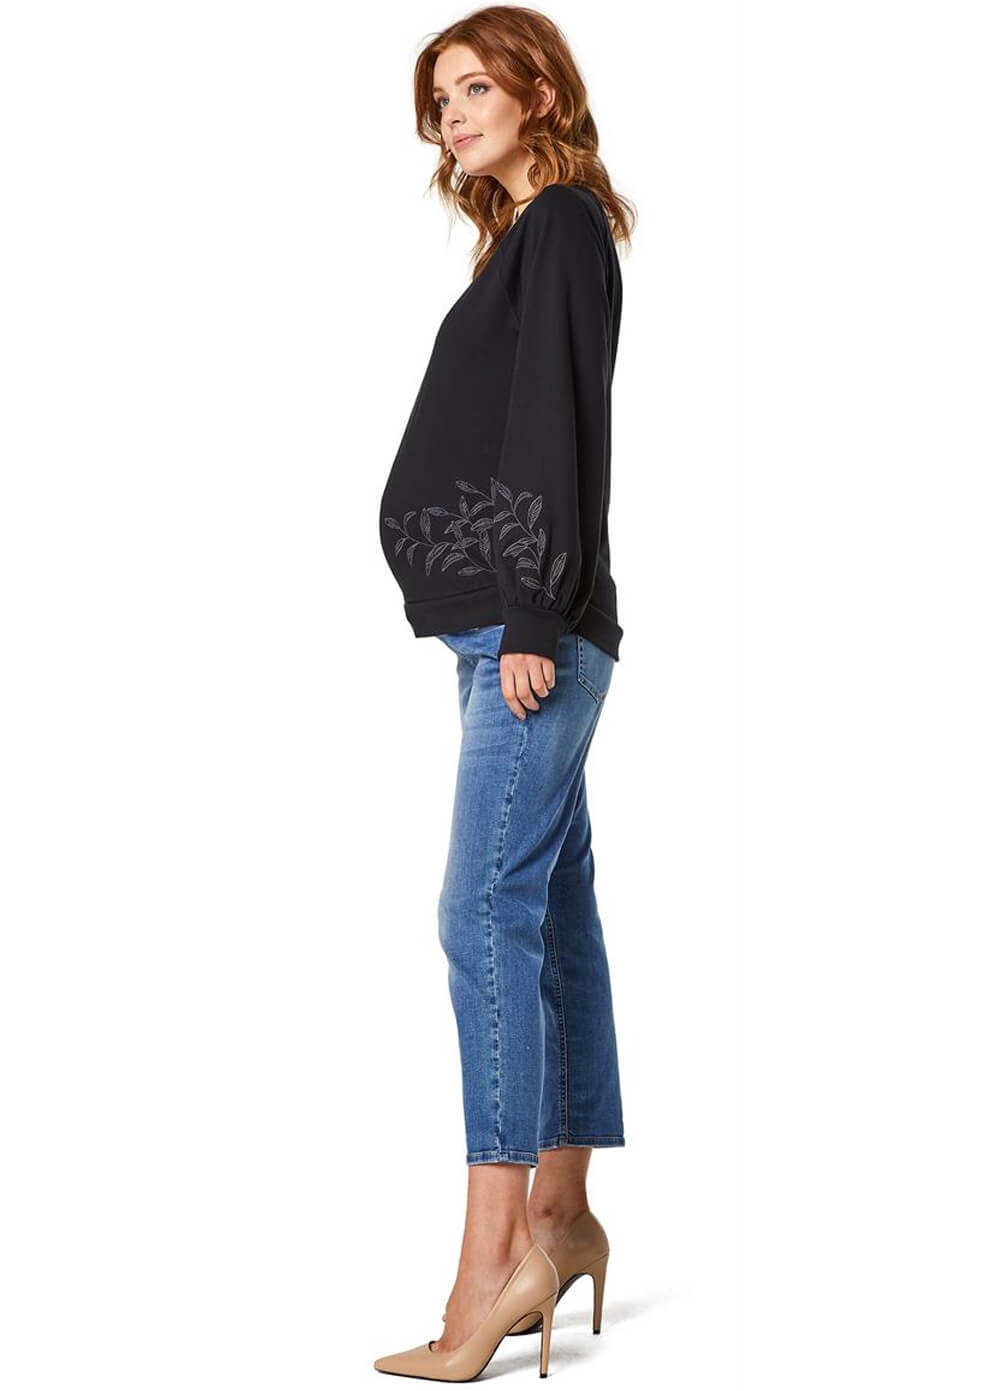 Queen mum - Embroidered Leaf Organic Maternity Sweater | Queen Bee